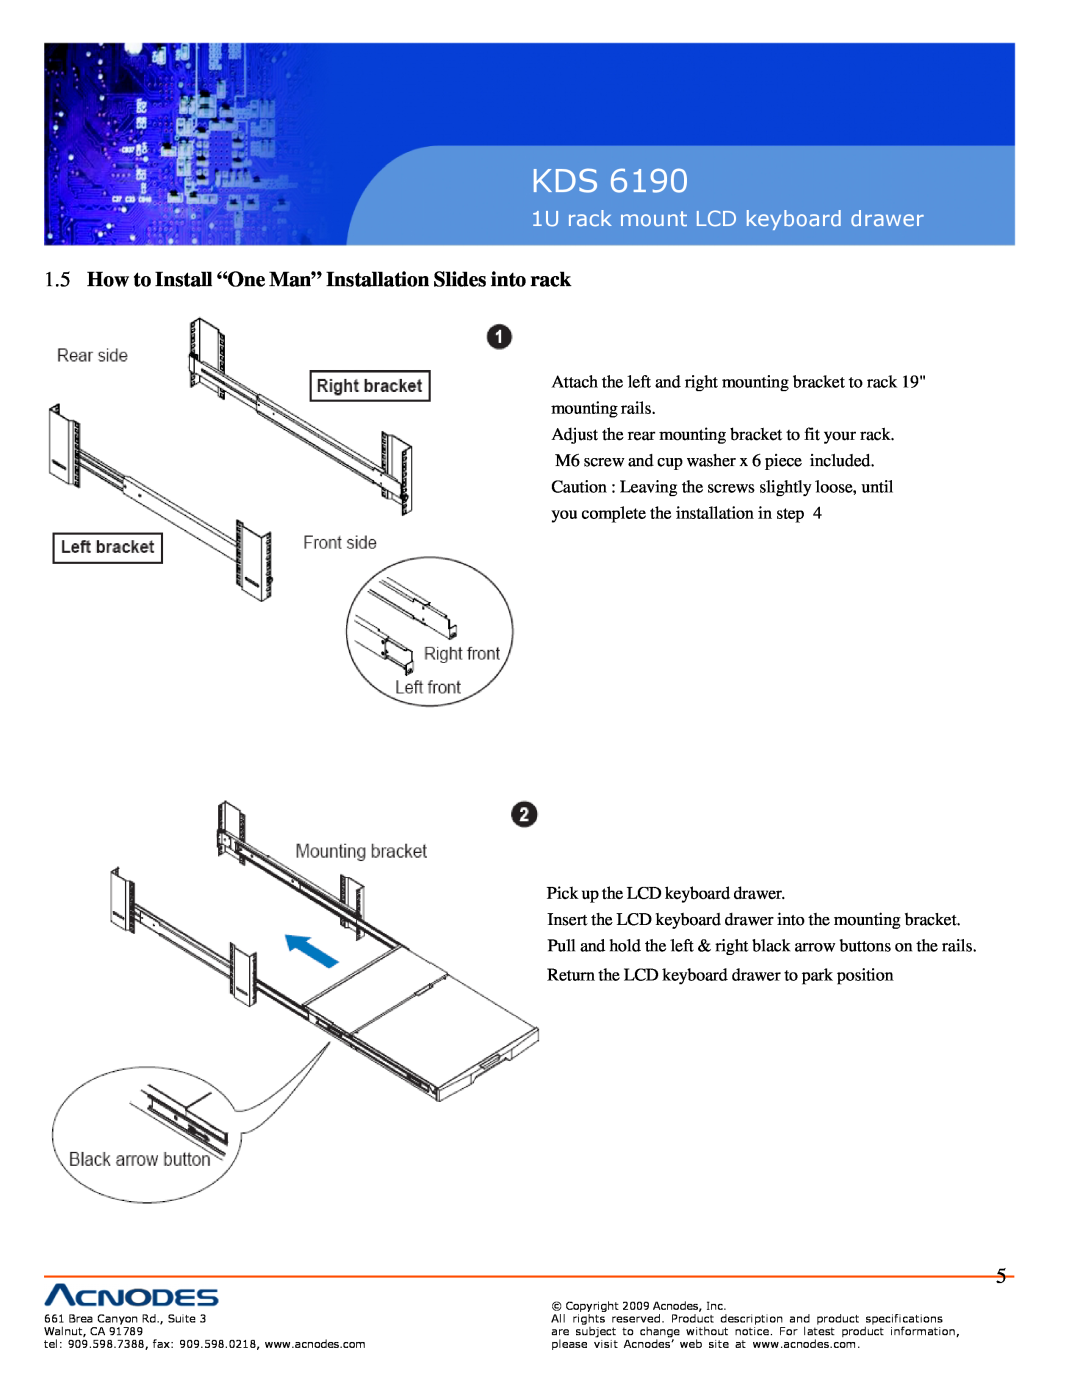 Acnodes KDS 6190 specifications How to Install “One Man” Installation Slides into rack, 1U rack mount LCD keyboard drawer 